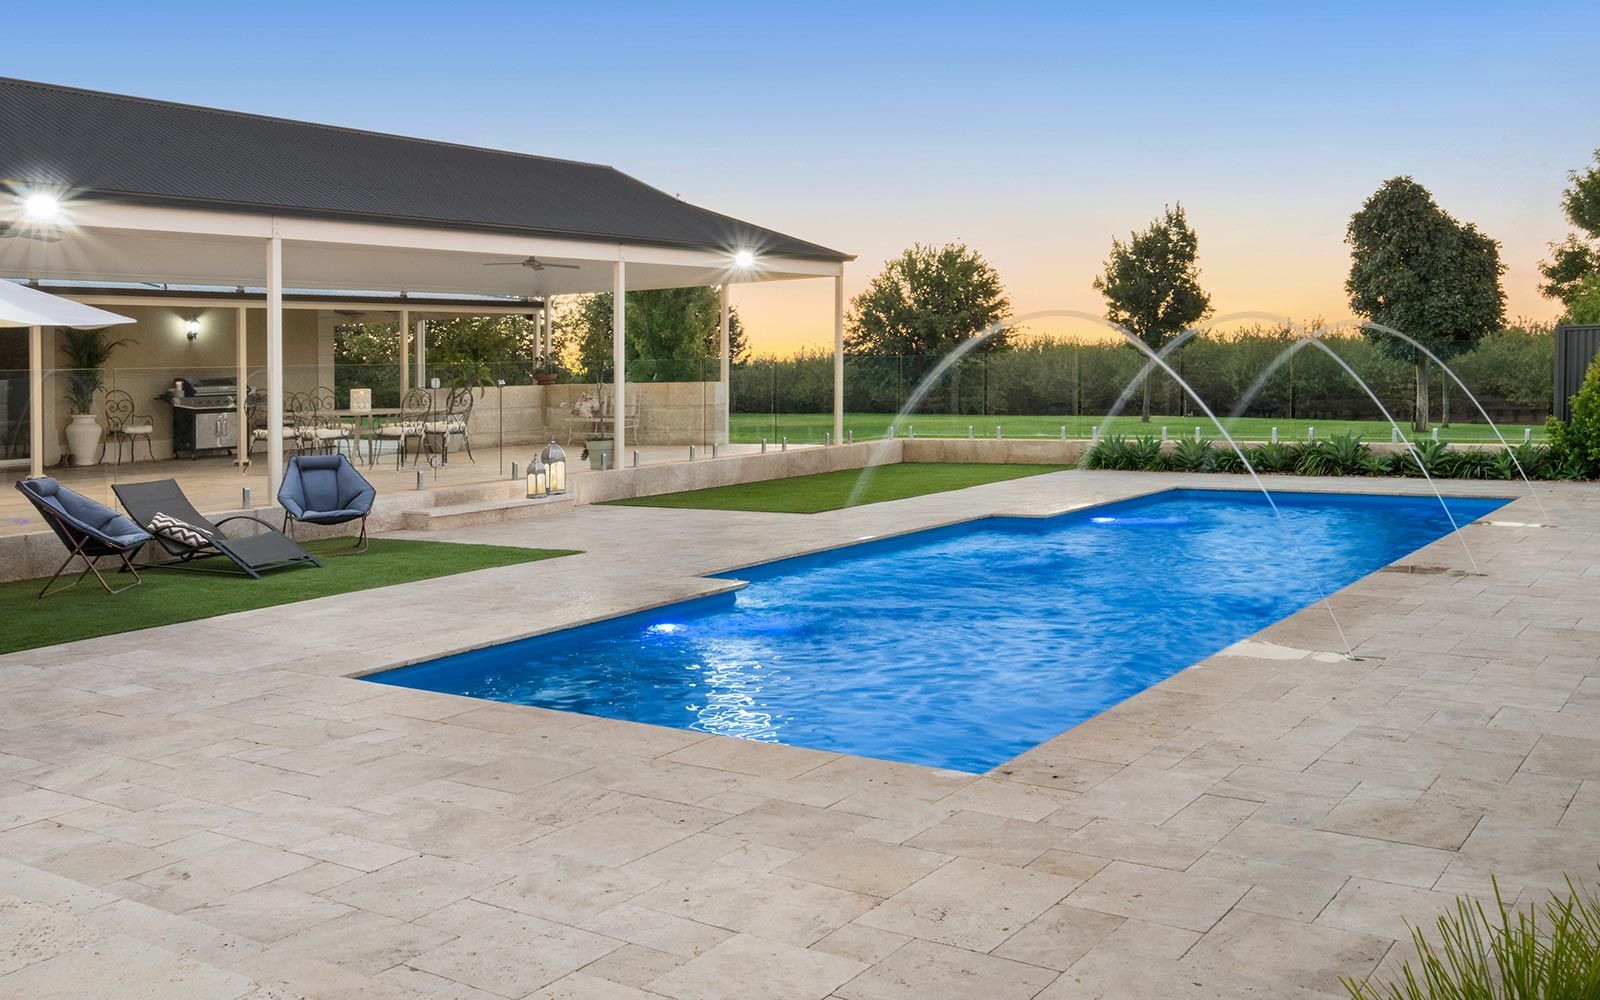 Residential premium fibreglass specialty rectangular pools. Servicing the Central Coast, Newcastle, Lake Macquarie and Hunter regions.